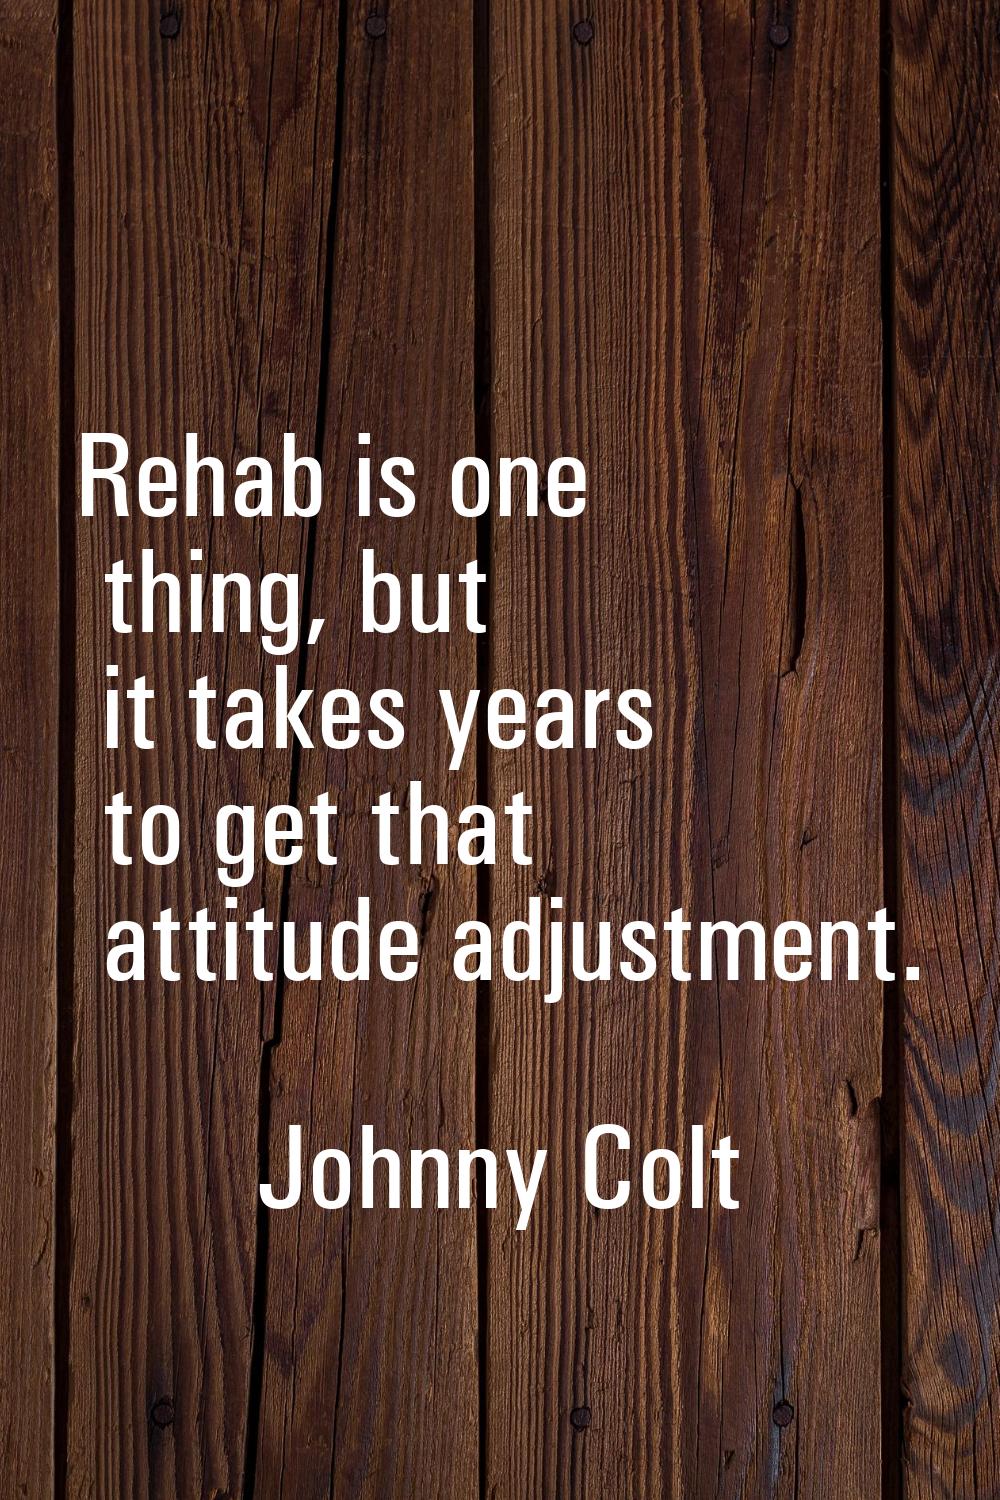 Rehab is one thing, but it takes years to get that attitude adjustment.